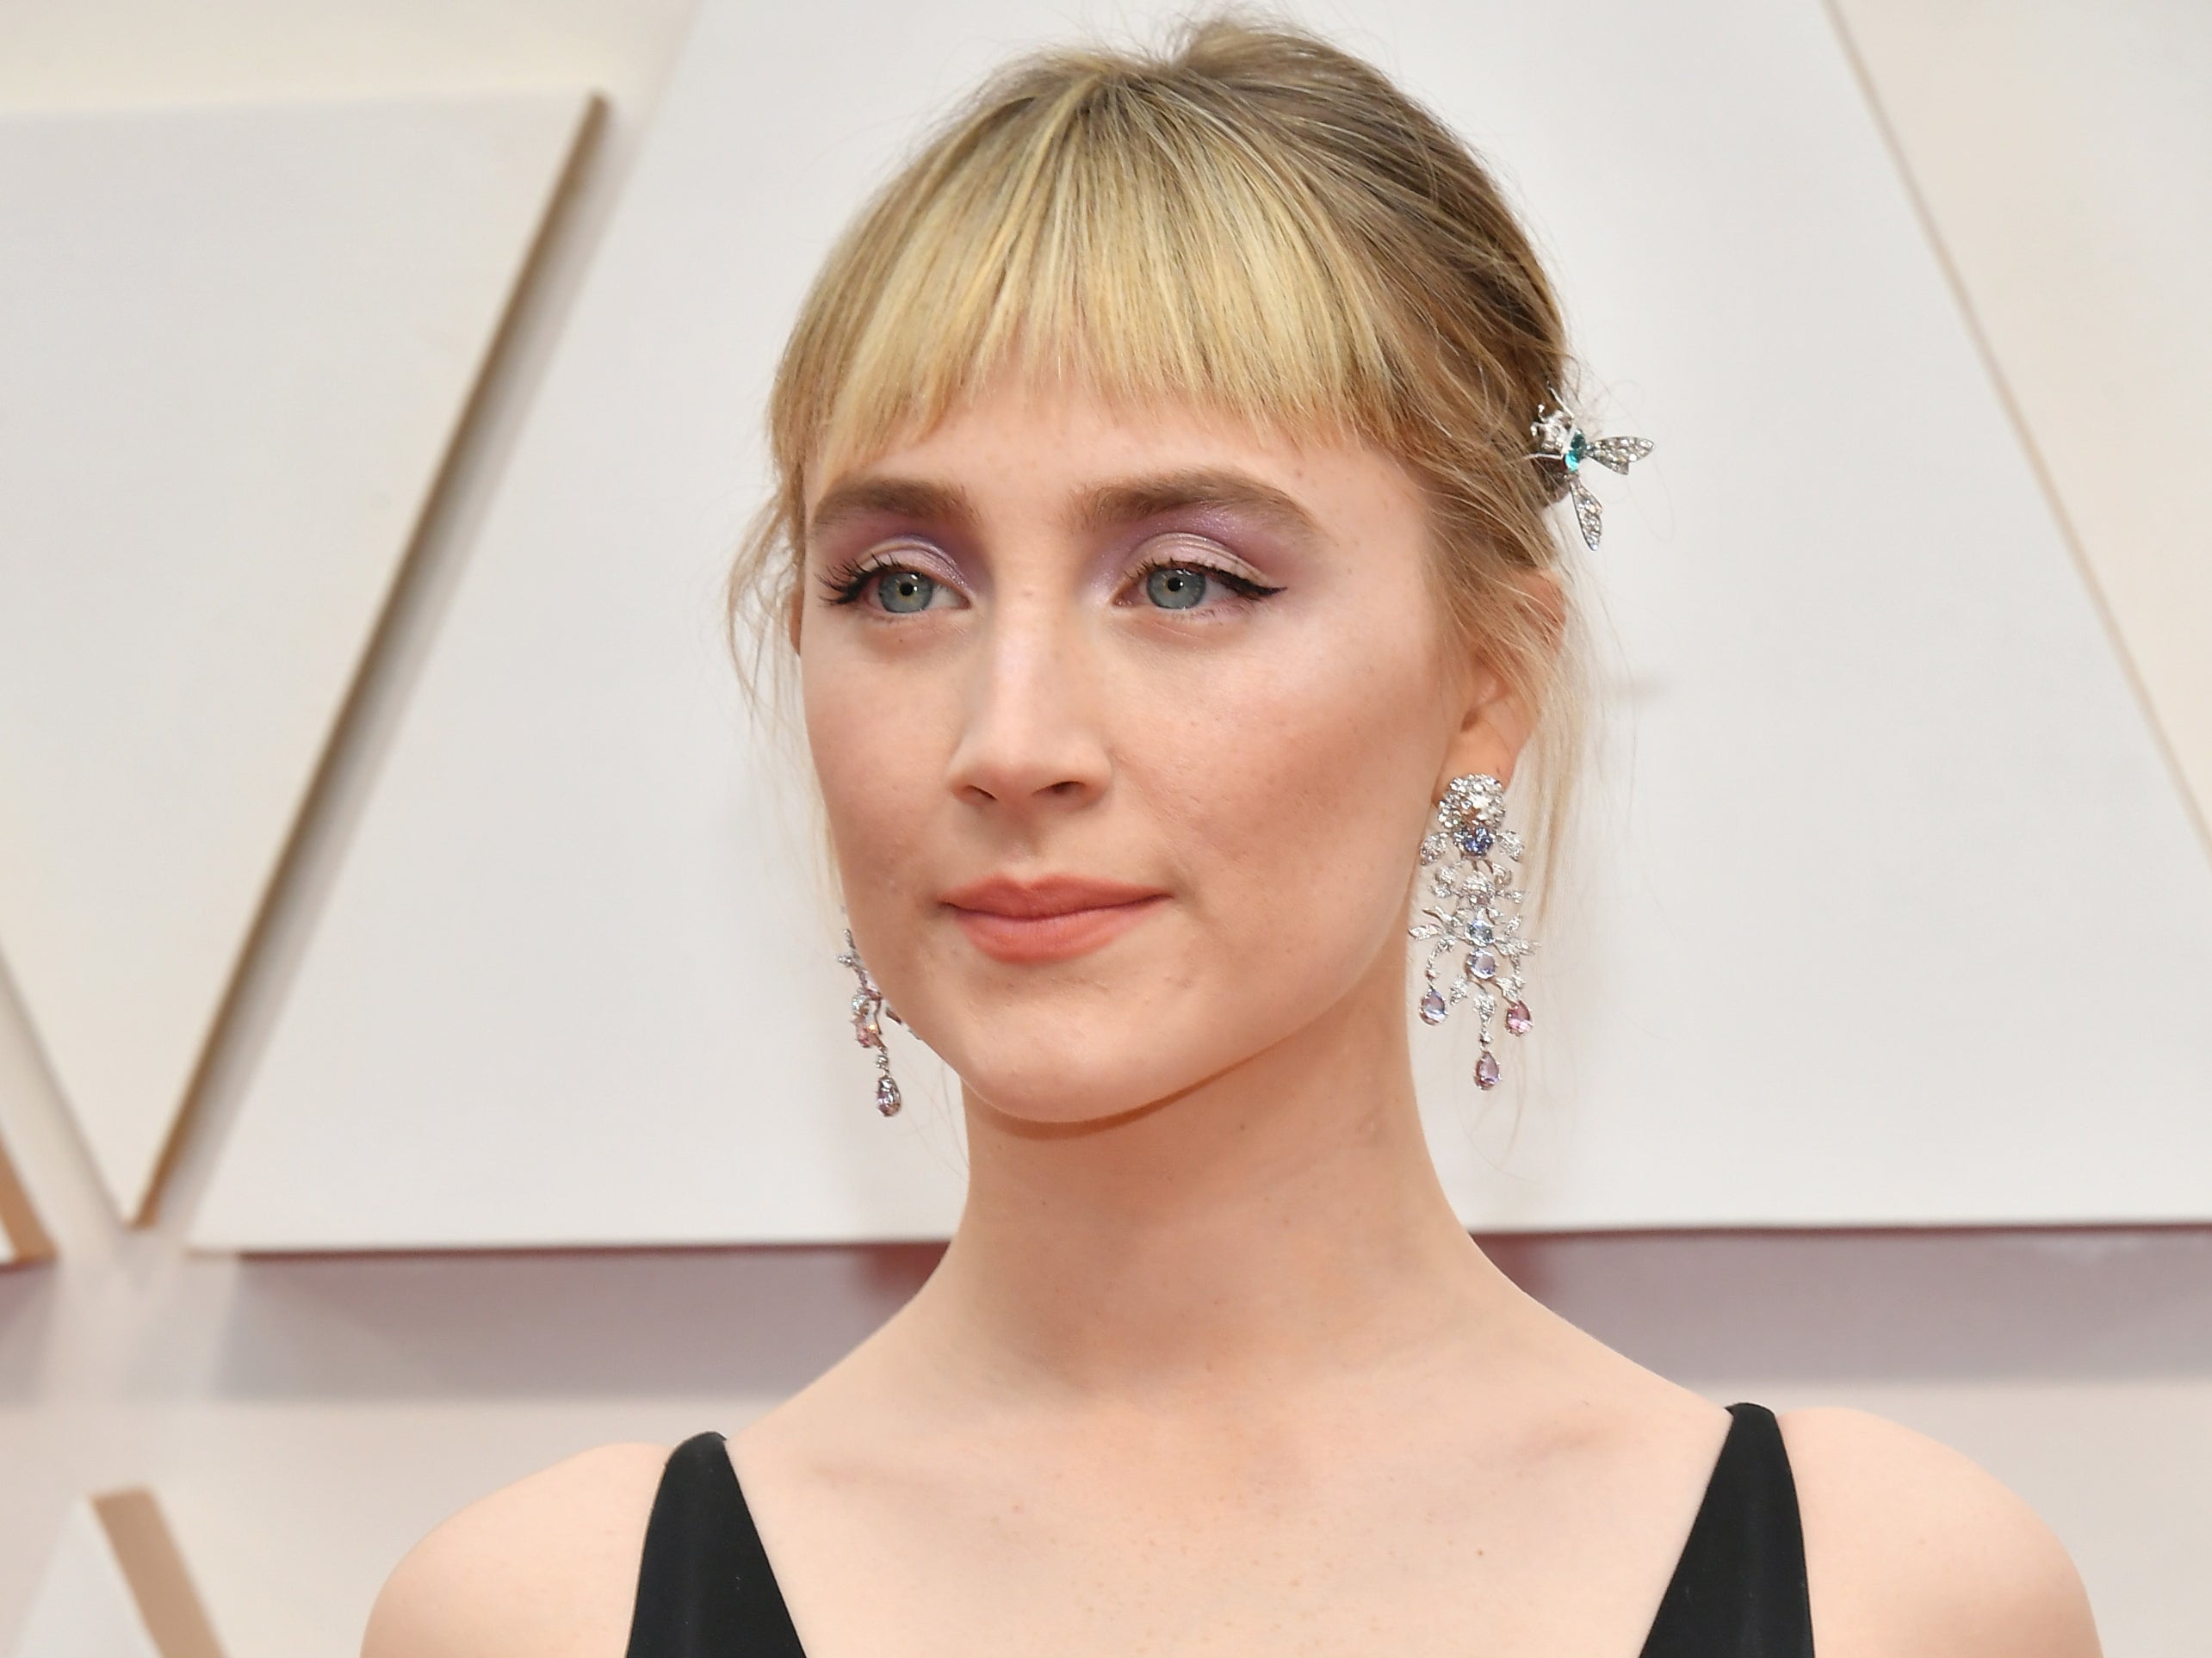 Saoirse Ronan pictured at the 2020 Oscars